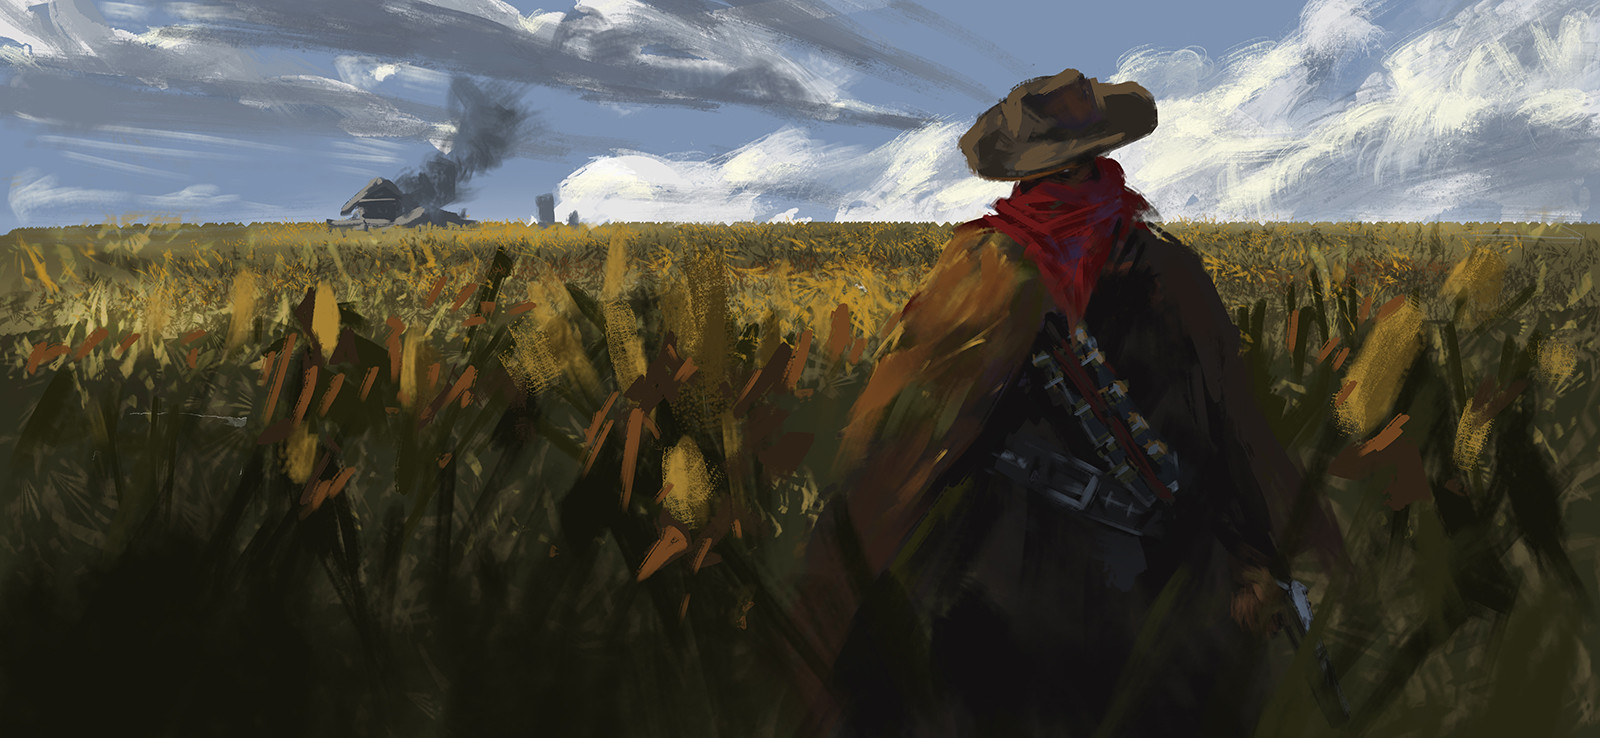 The red bandit (30mins)